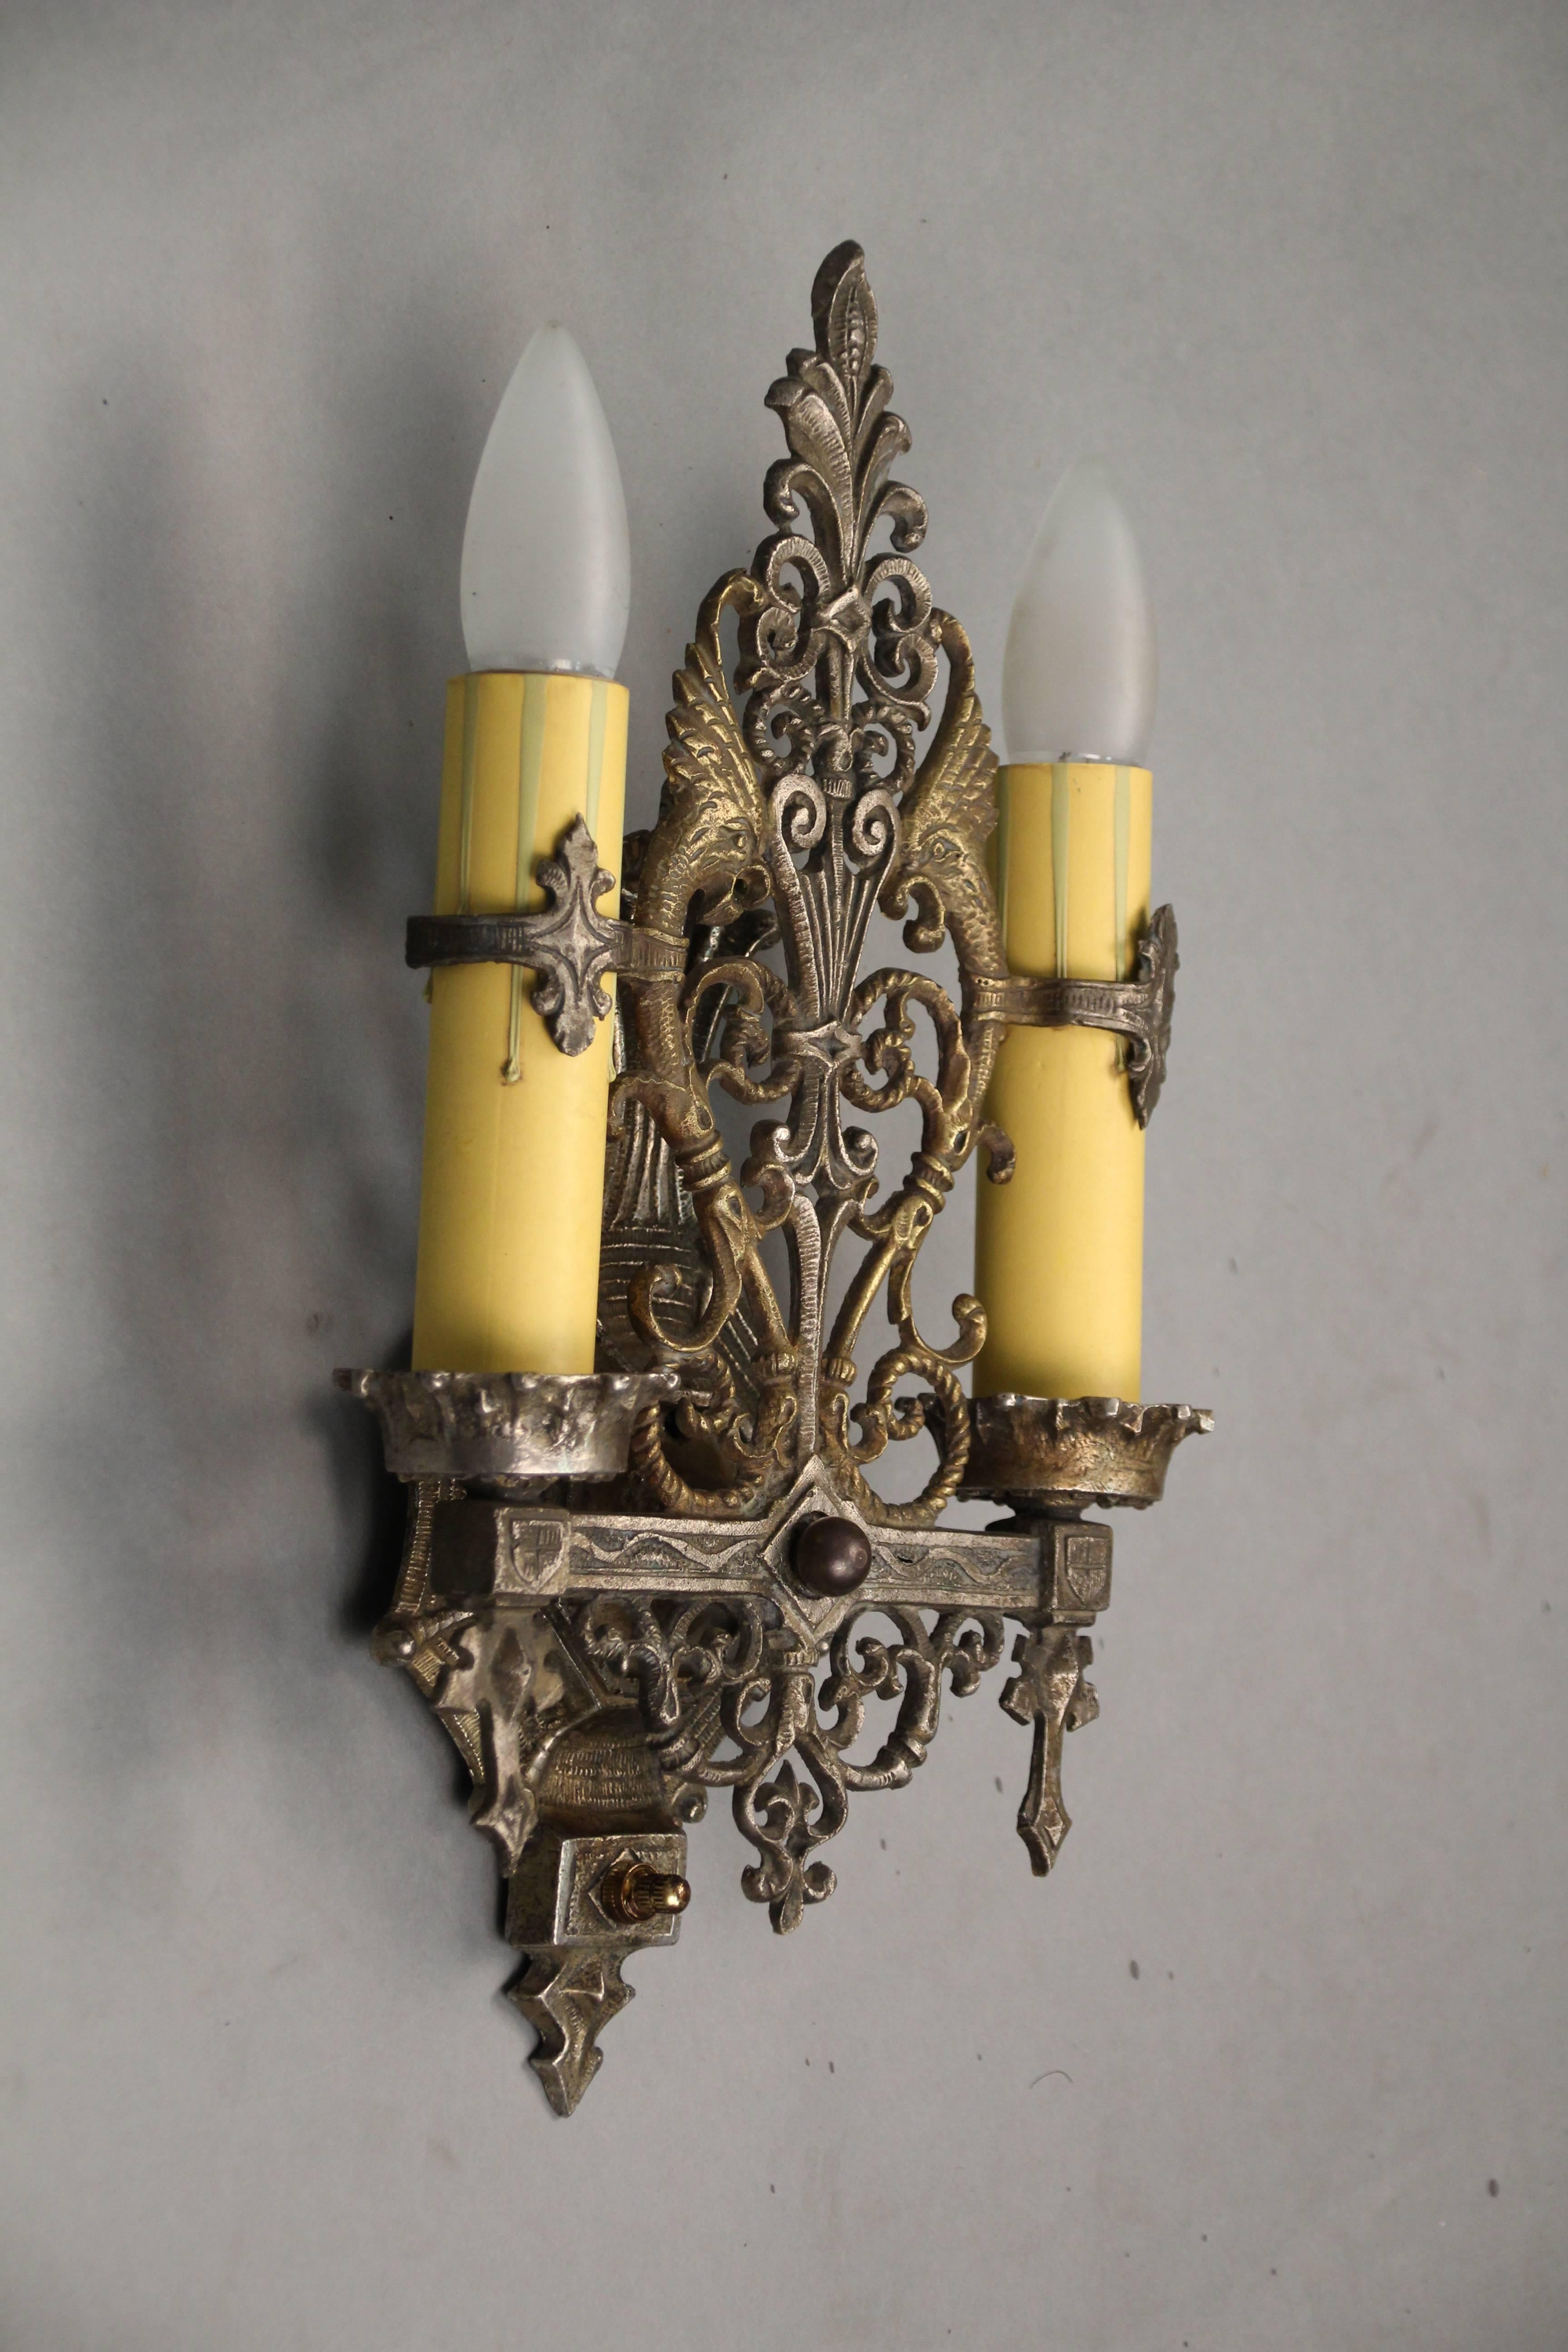 Attractive pair of double sconces with dragon motif, circa 1920s. Original finish.